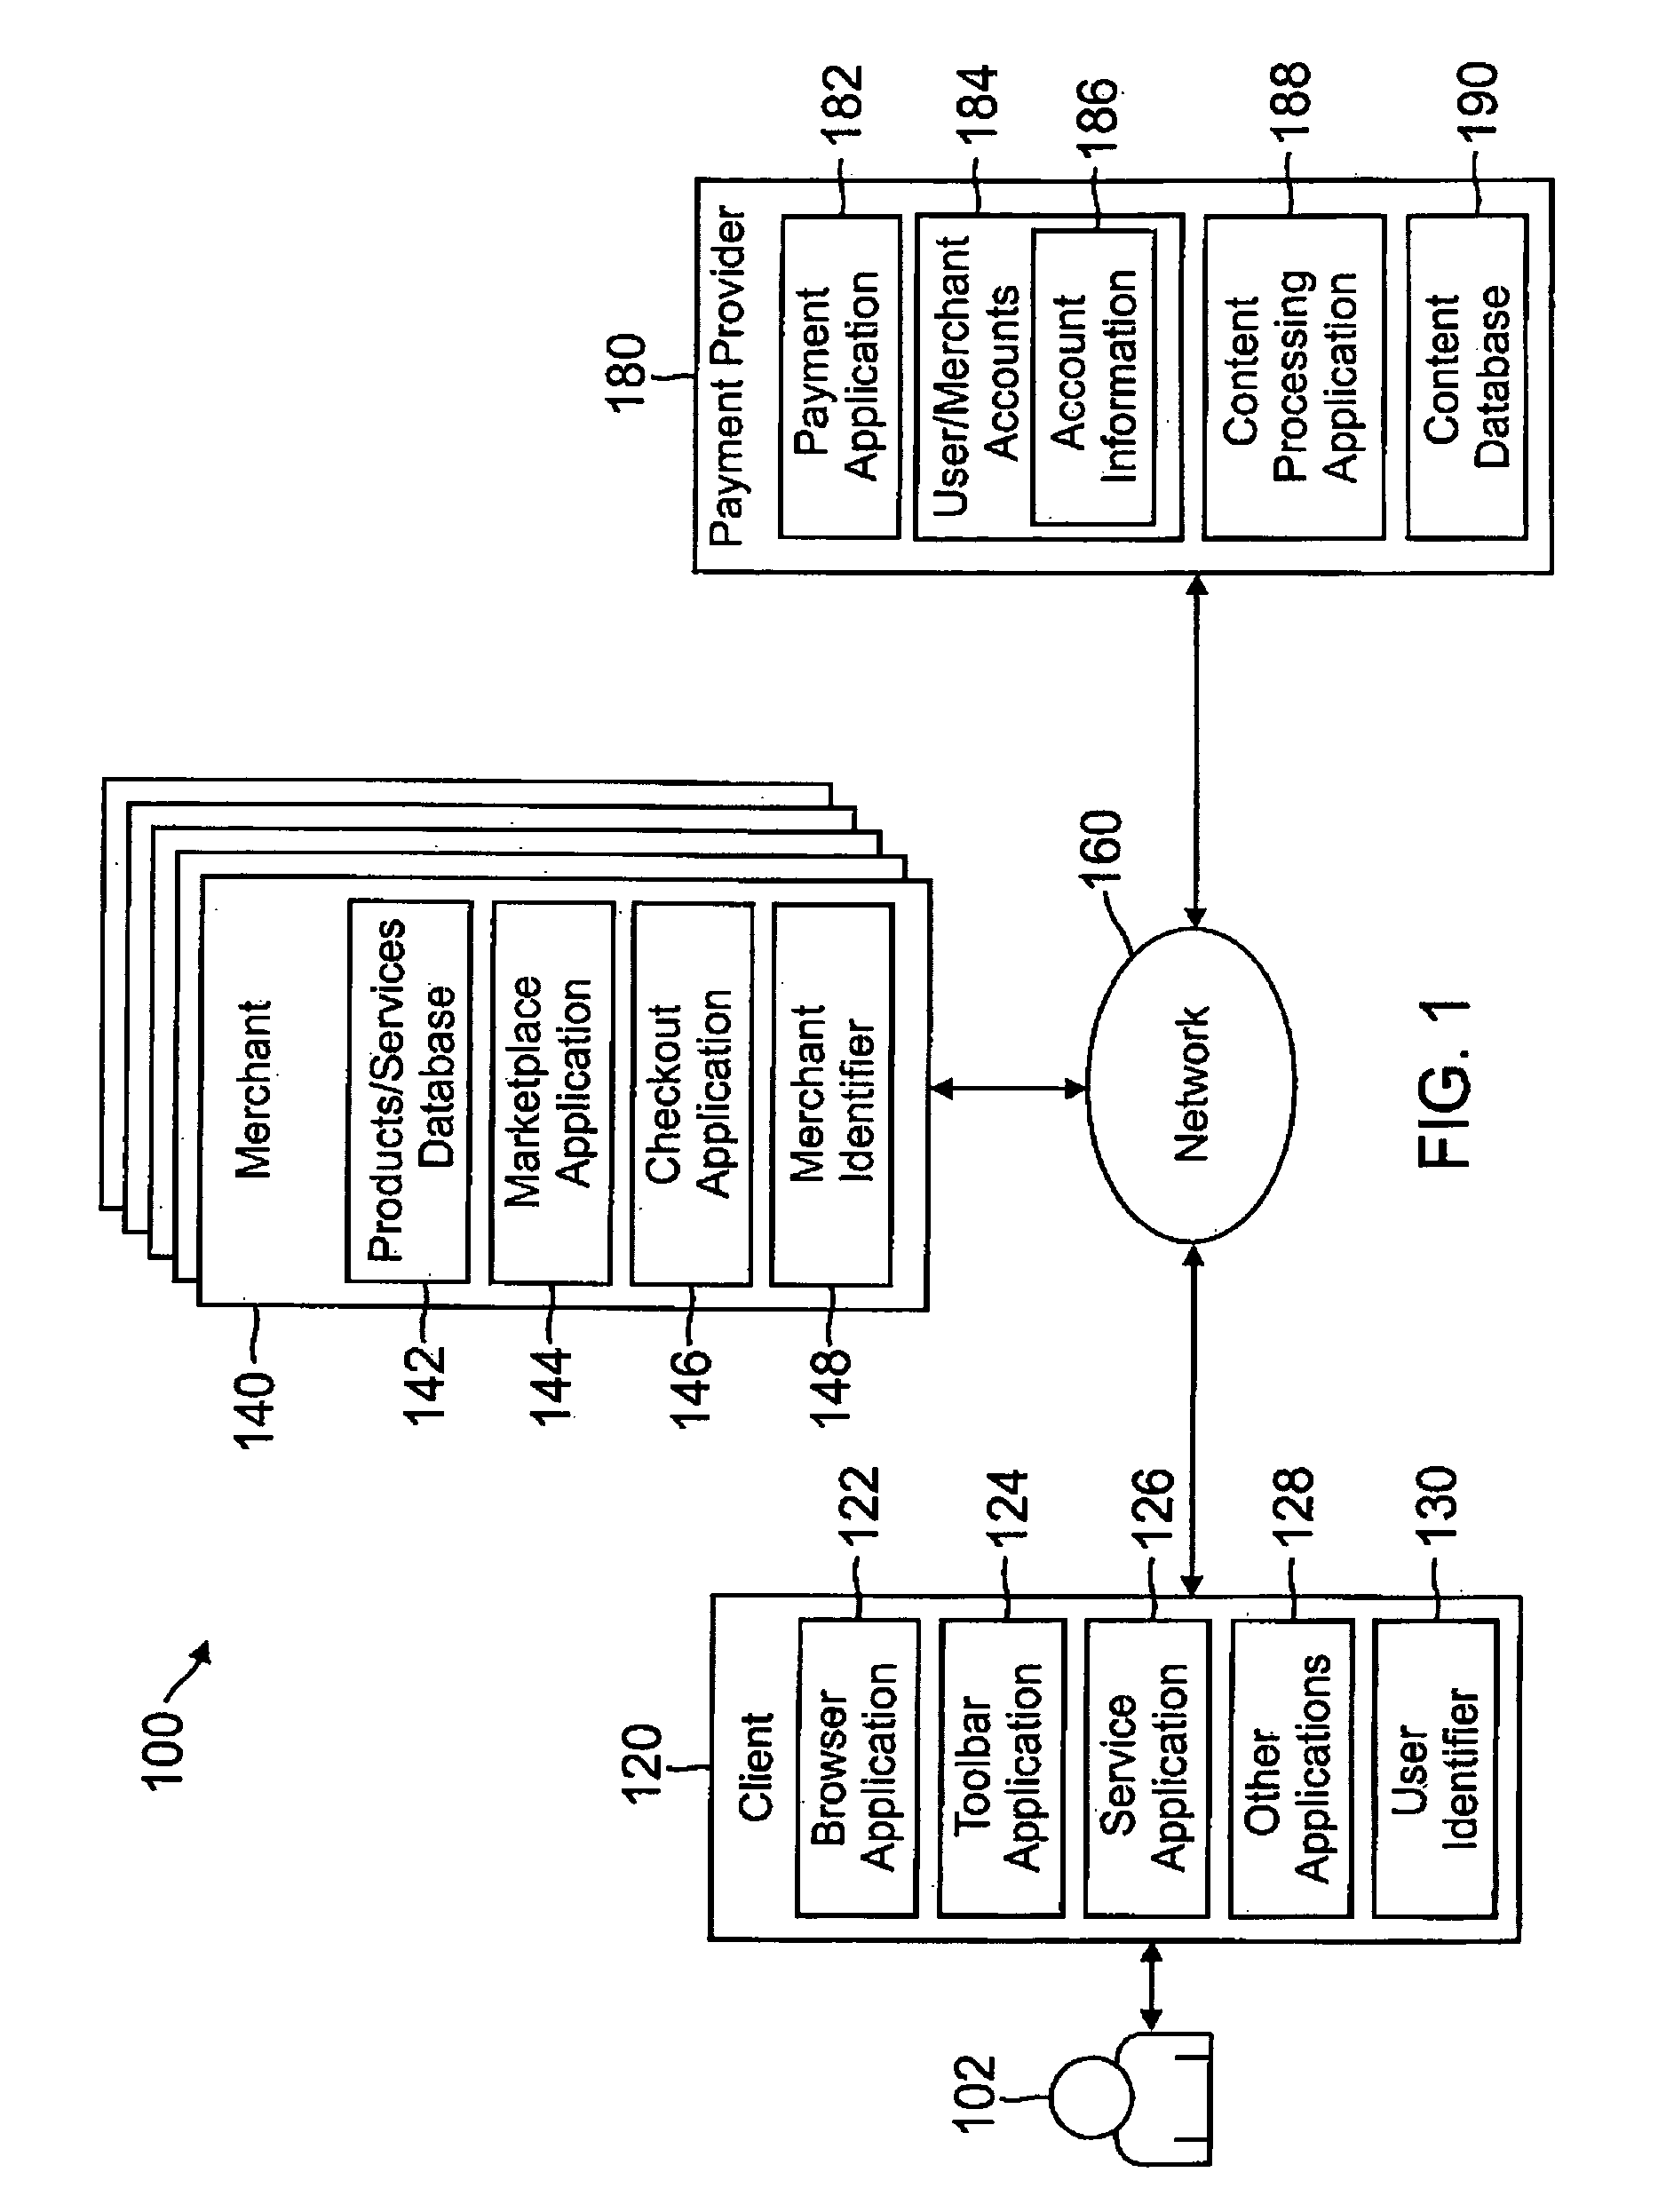 Systems and methods for facilitating financial transactions over a network